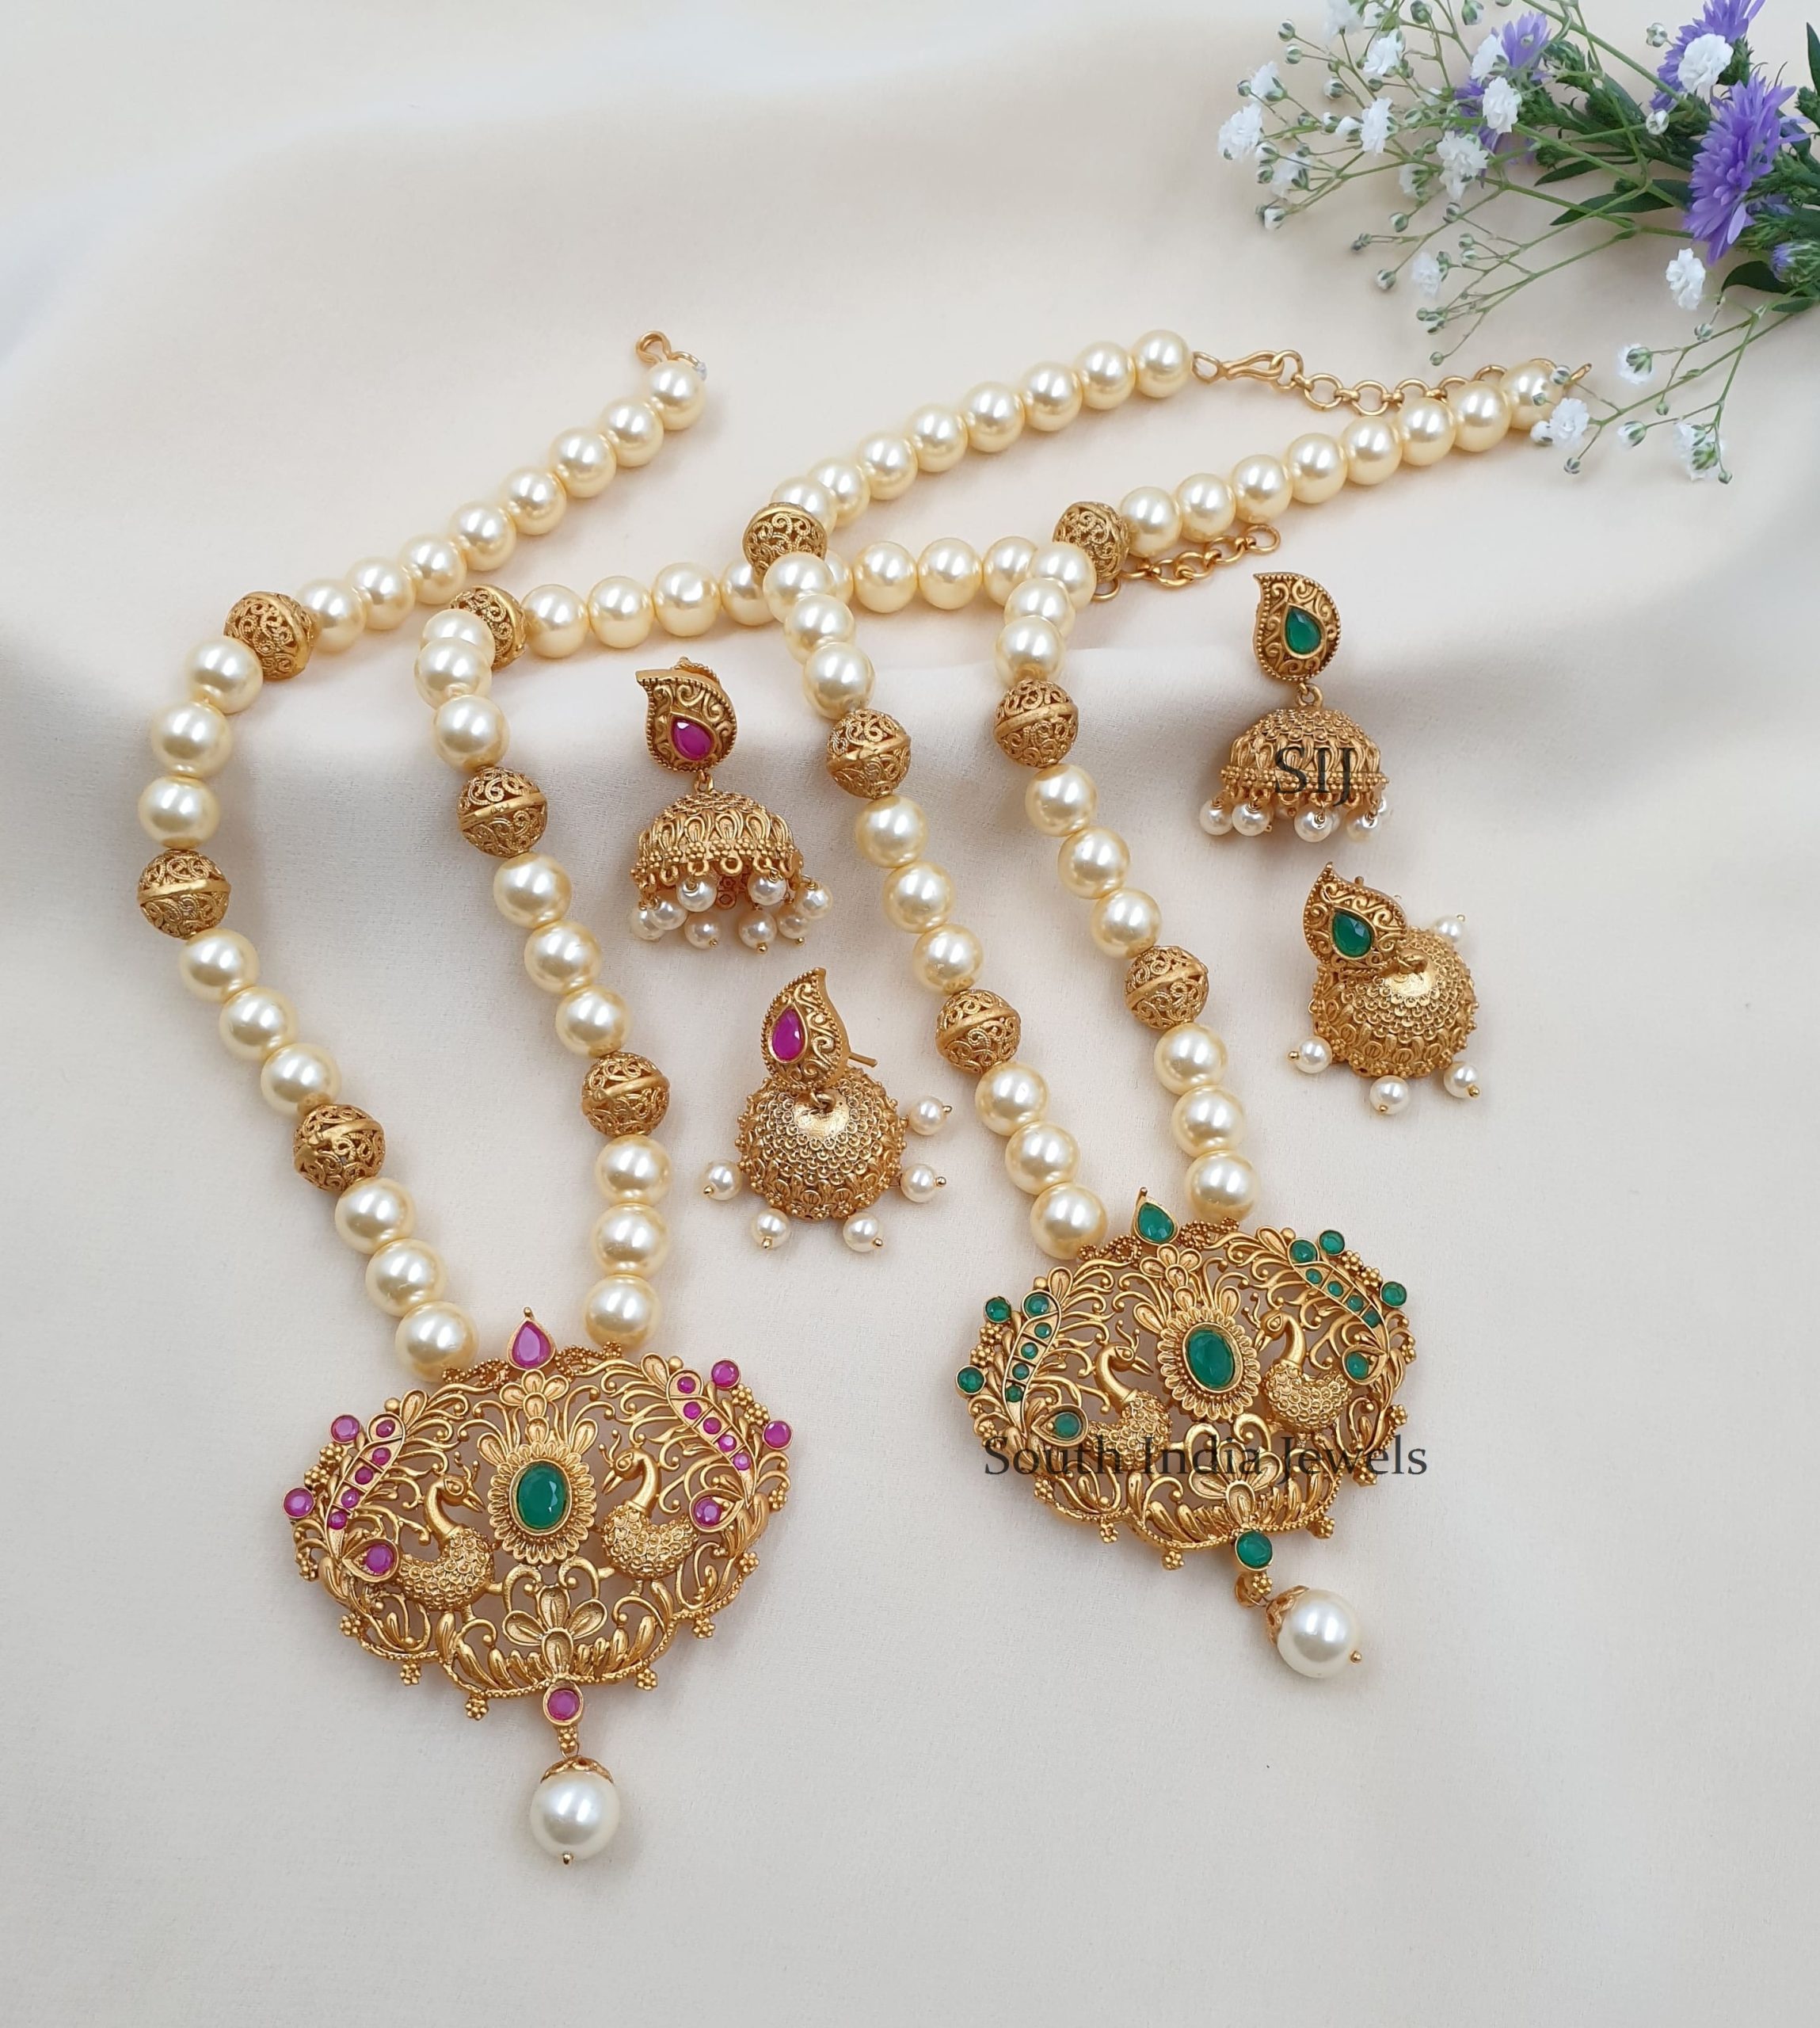 Amazing Peacock Design Pearls Necklace